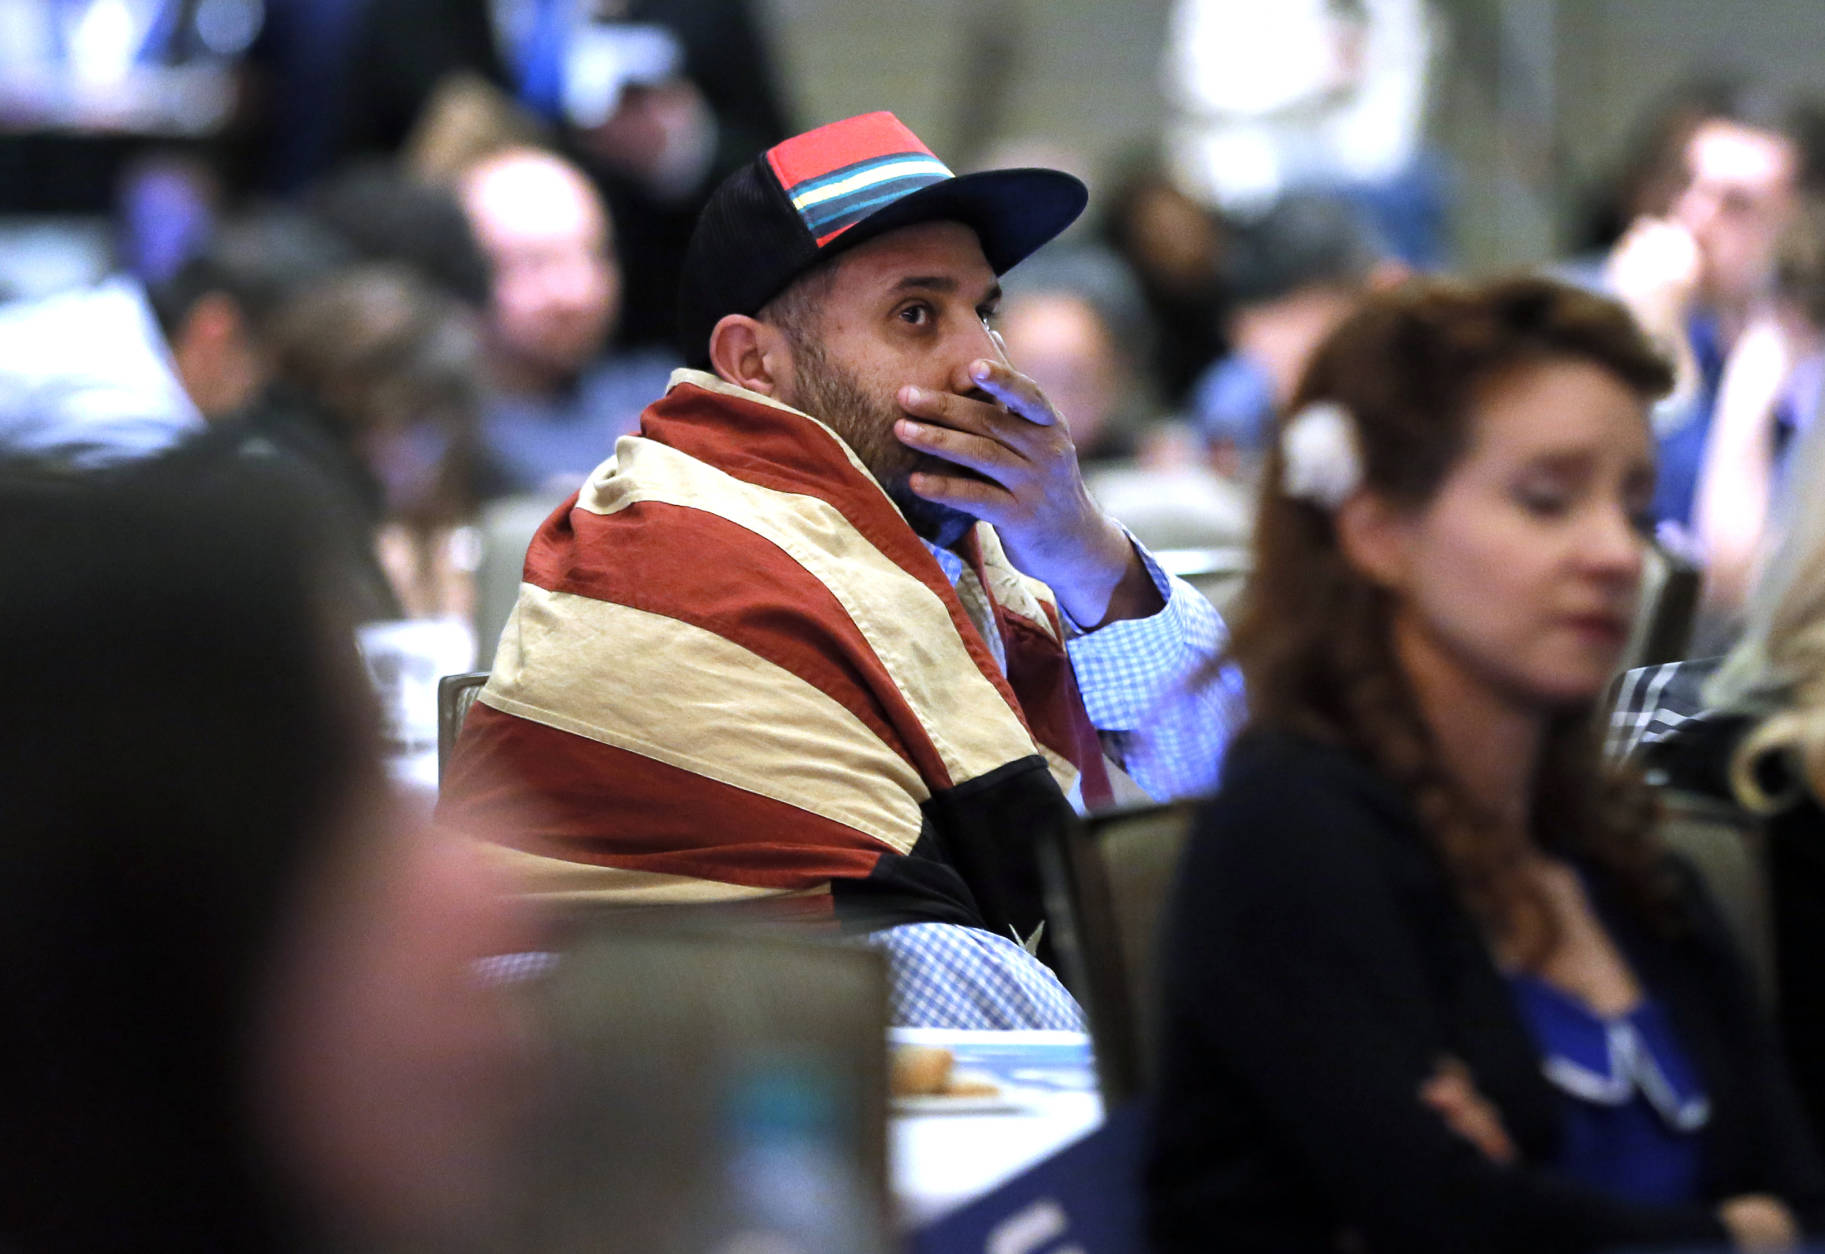 Khaled Nasr of Boston, sits wrapped in an American flag as he watches returns on a nearby large projection screen during the Dallas County Democrats watch party, Tuesday Nov. 8, 2016, in Dallas. (AP Photo/Tony Gutierrez)